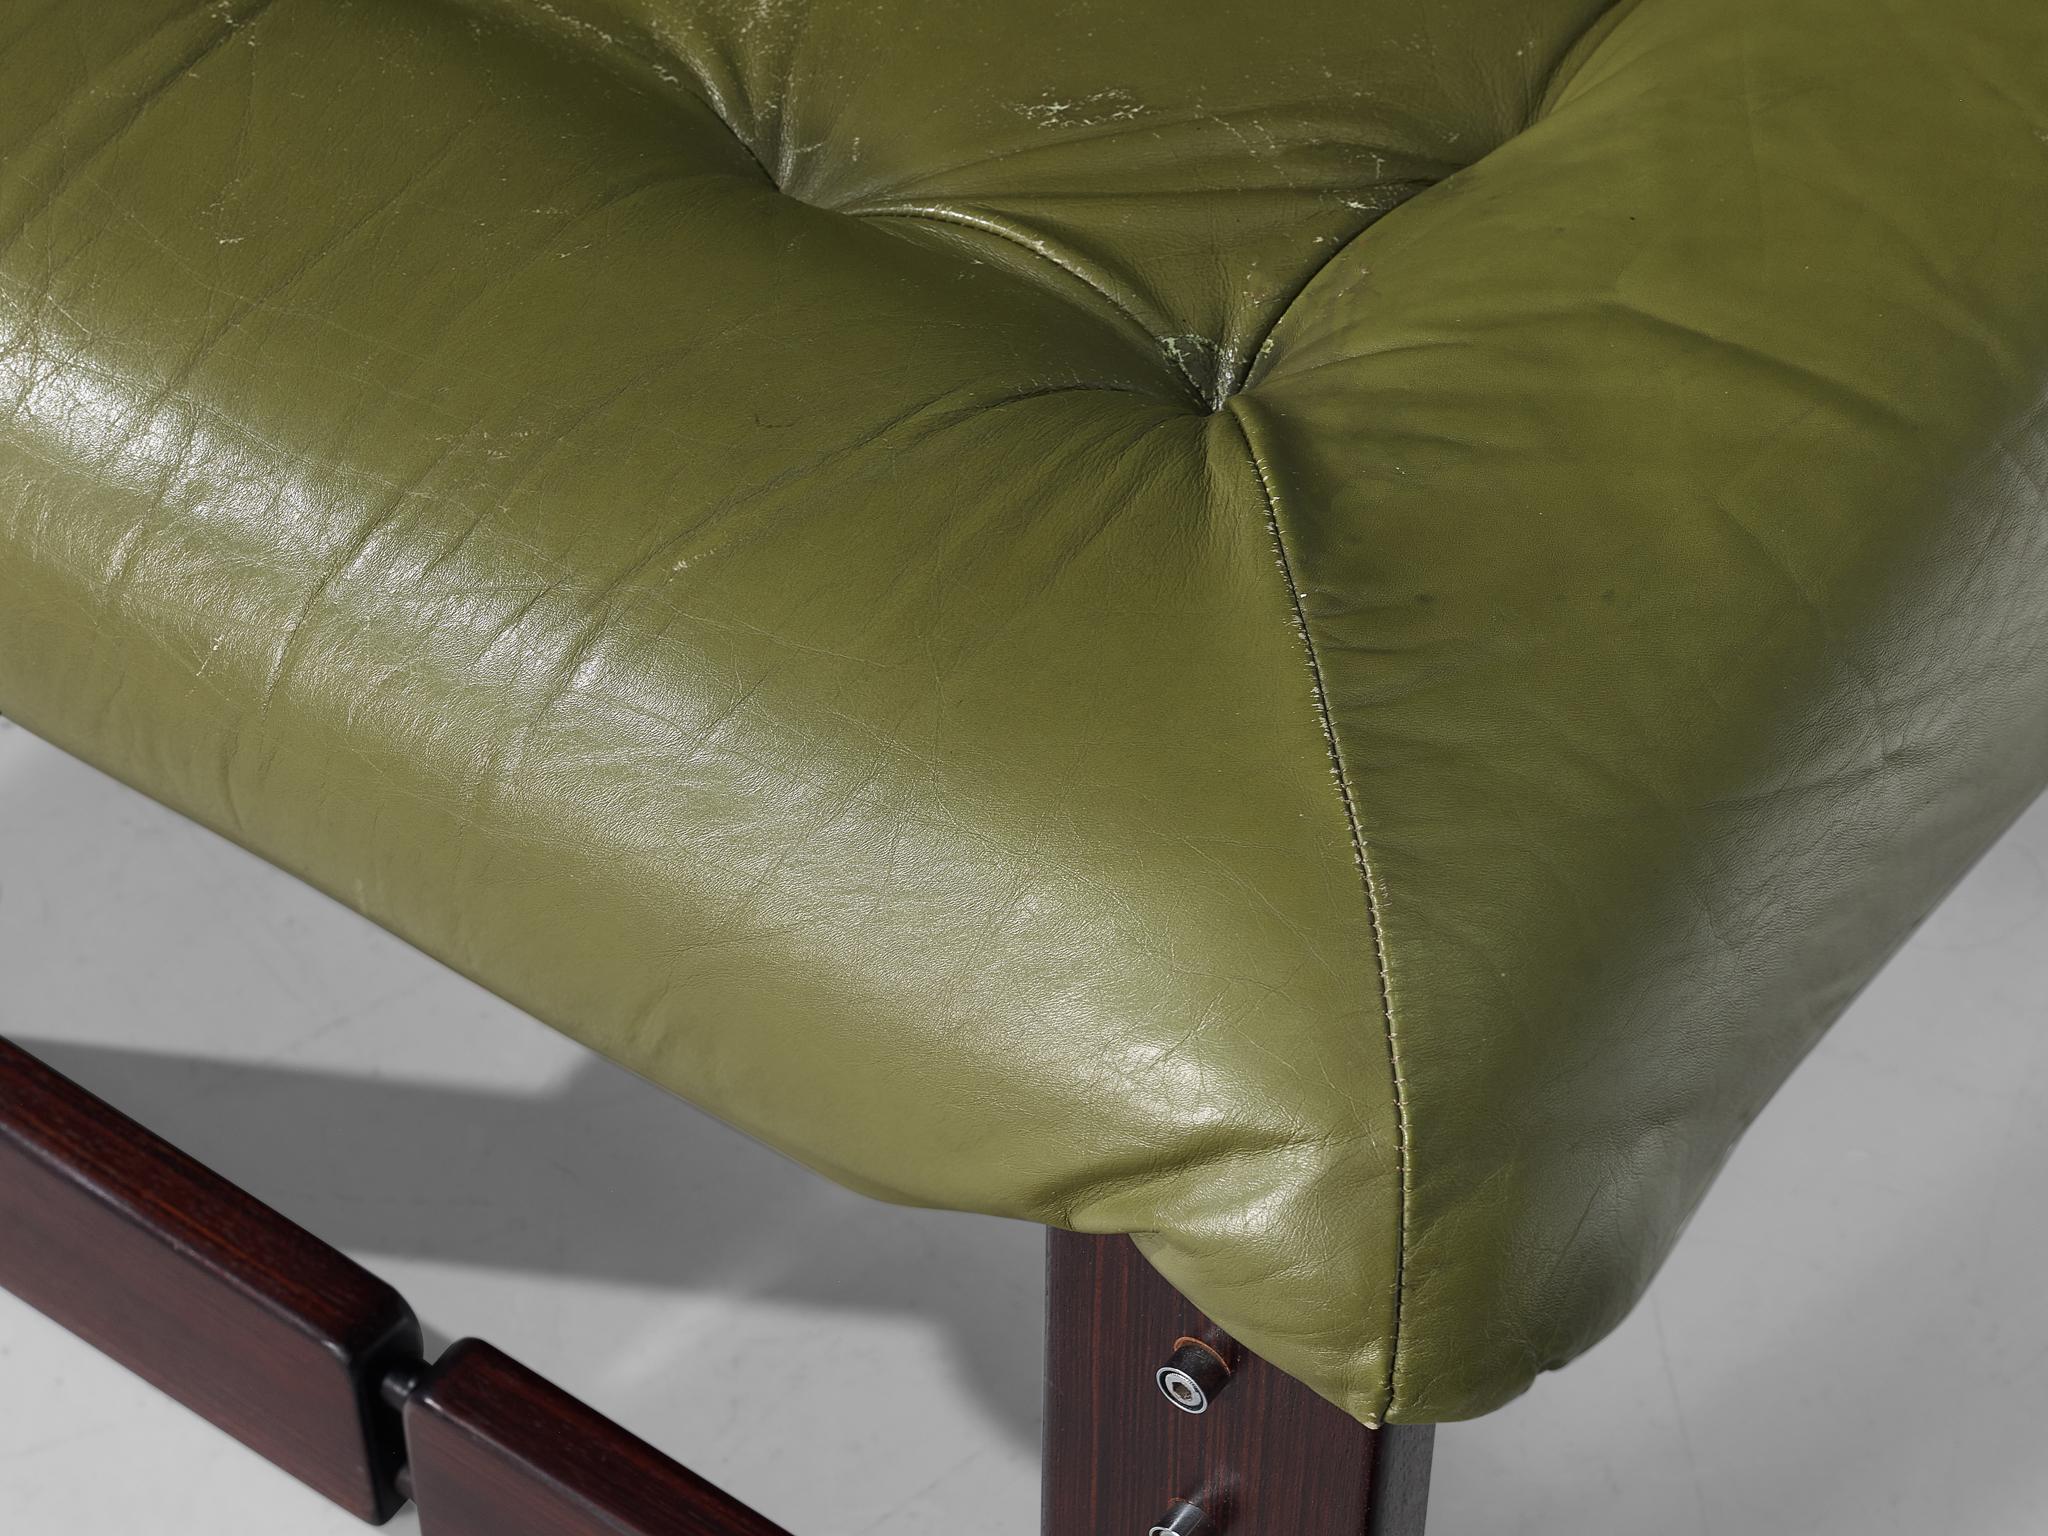 Percival Lafer Ottoman in Olive Green Leather and Mahogany